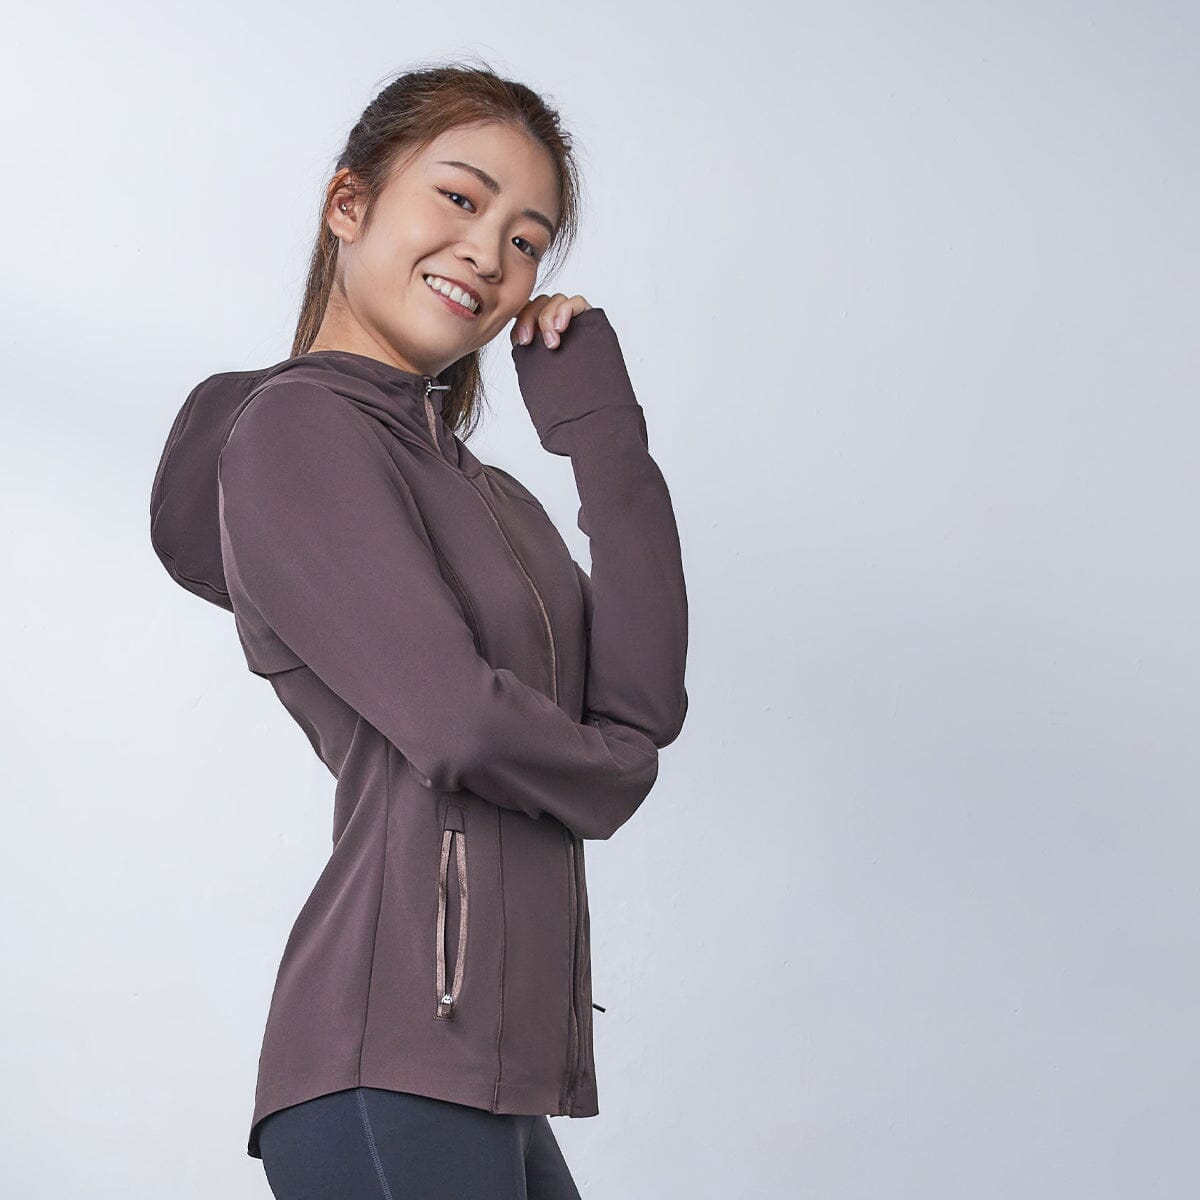 EFFORTLESS UV Protection Slim Fit Jacket Tops Her own words SPORTS 